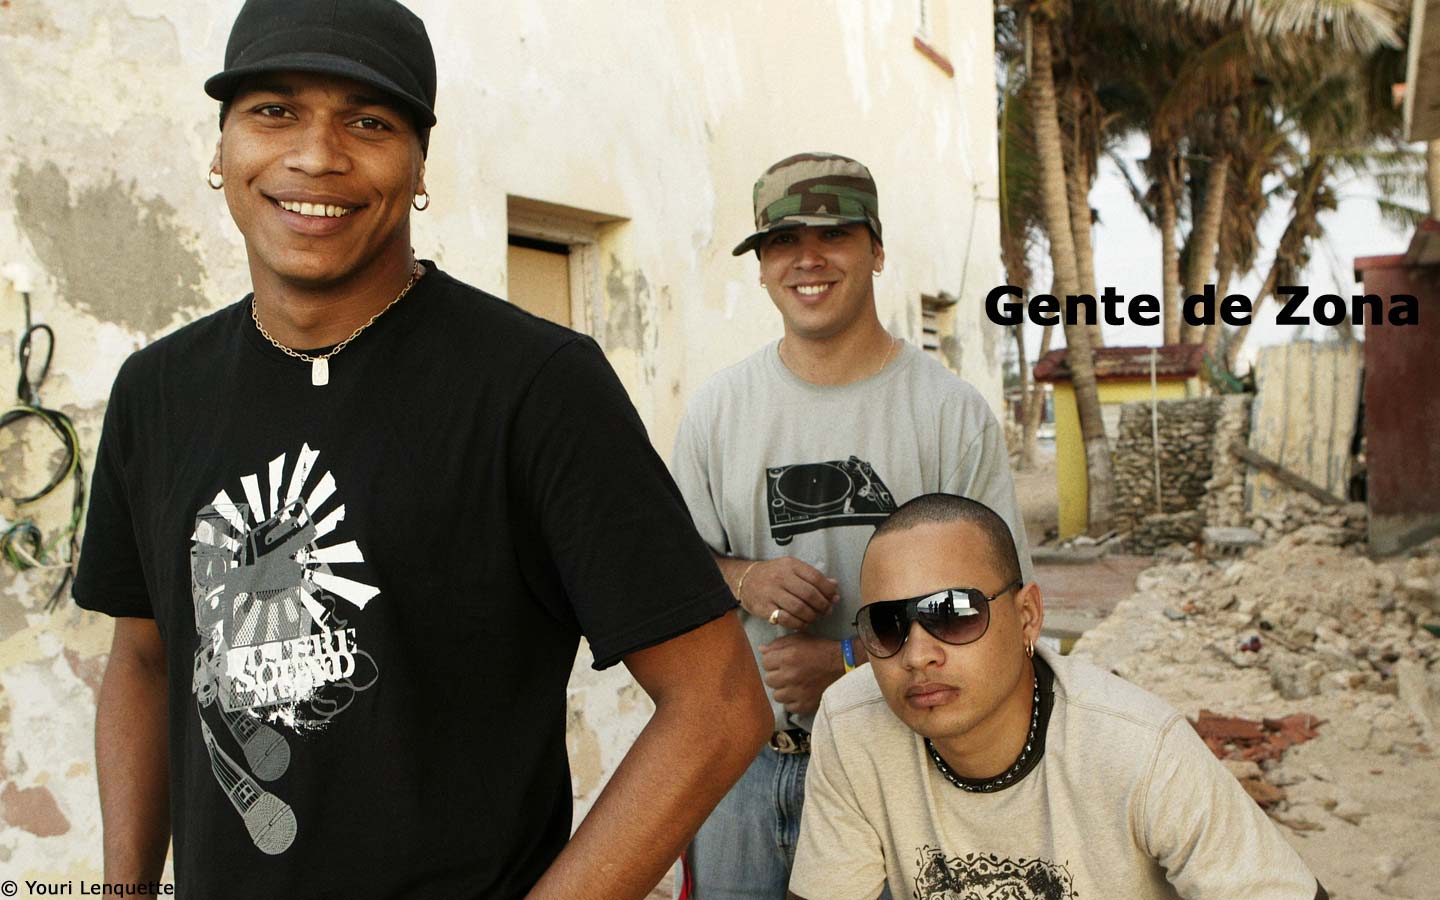 Gente de Zona will perform in Italy, France, Spain, and Germany